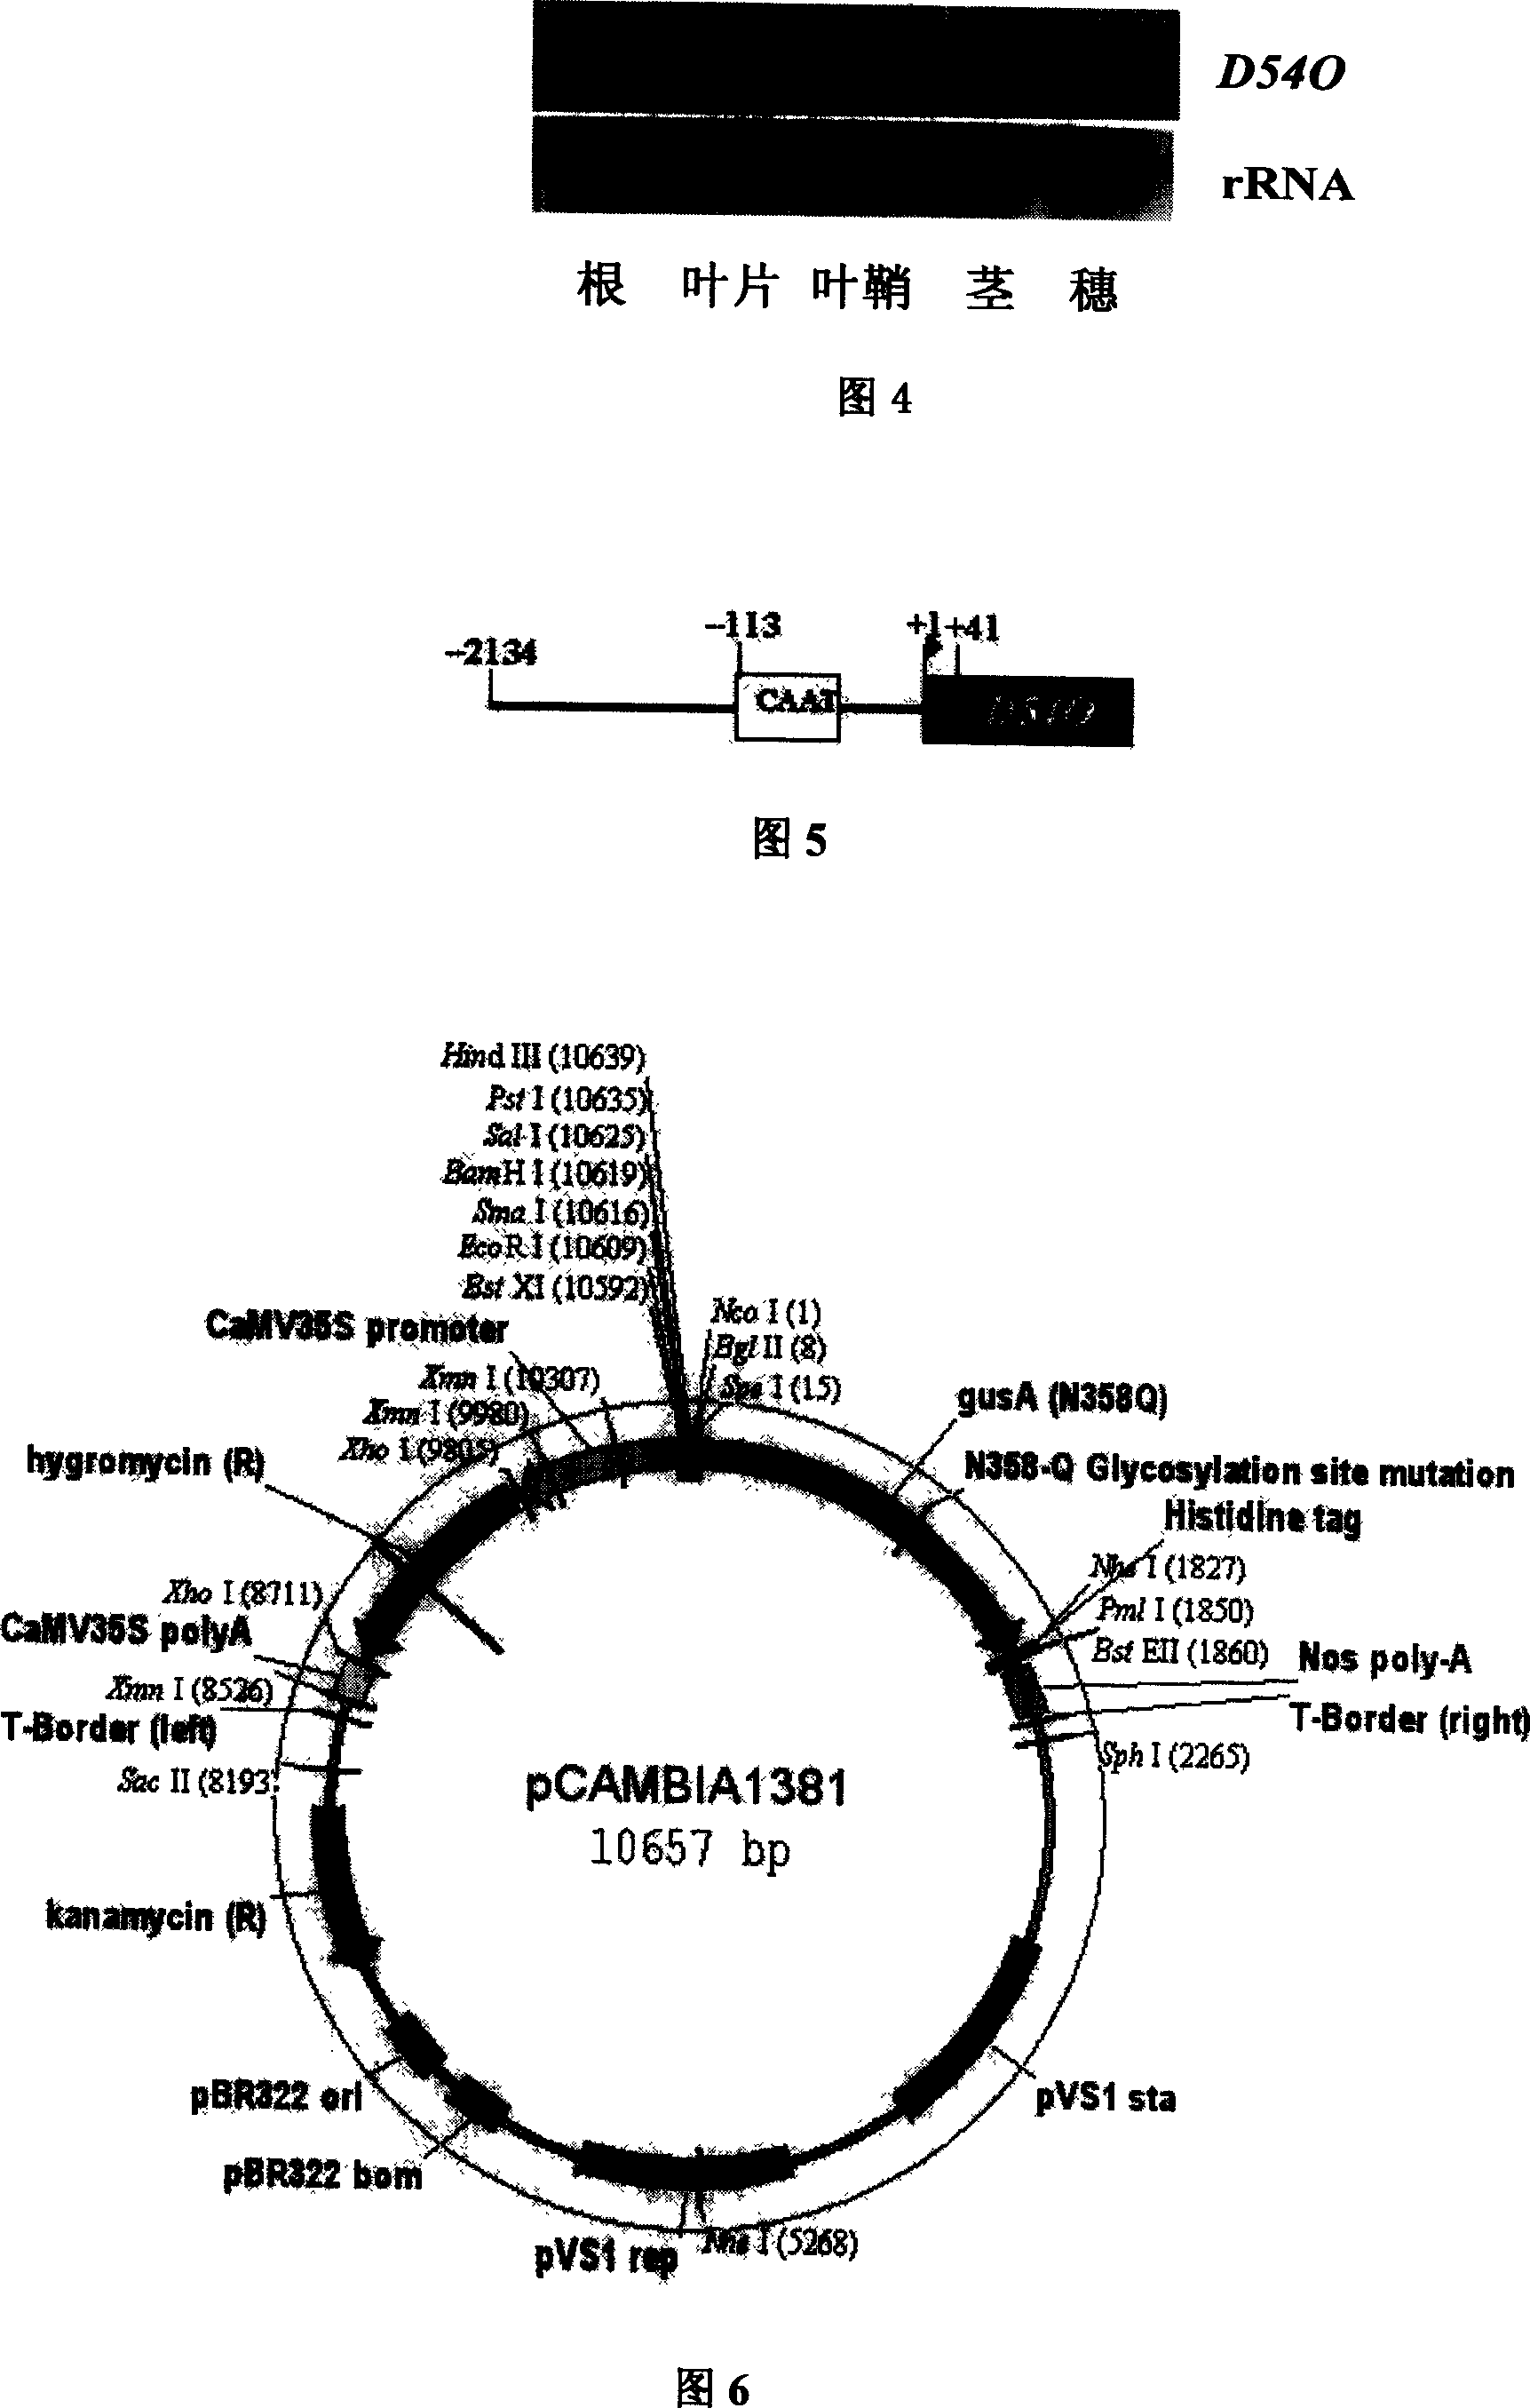 Tissue specificity expression promoter PD540 and application of the same in rice modification